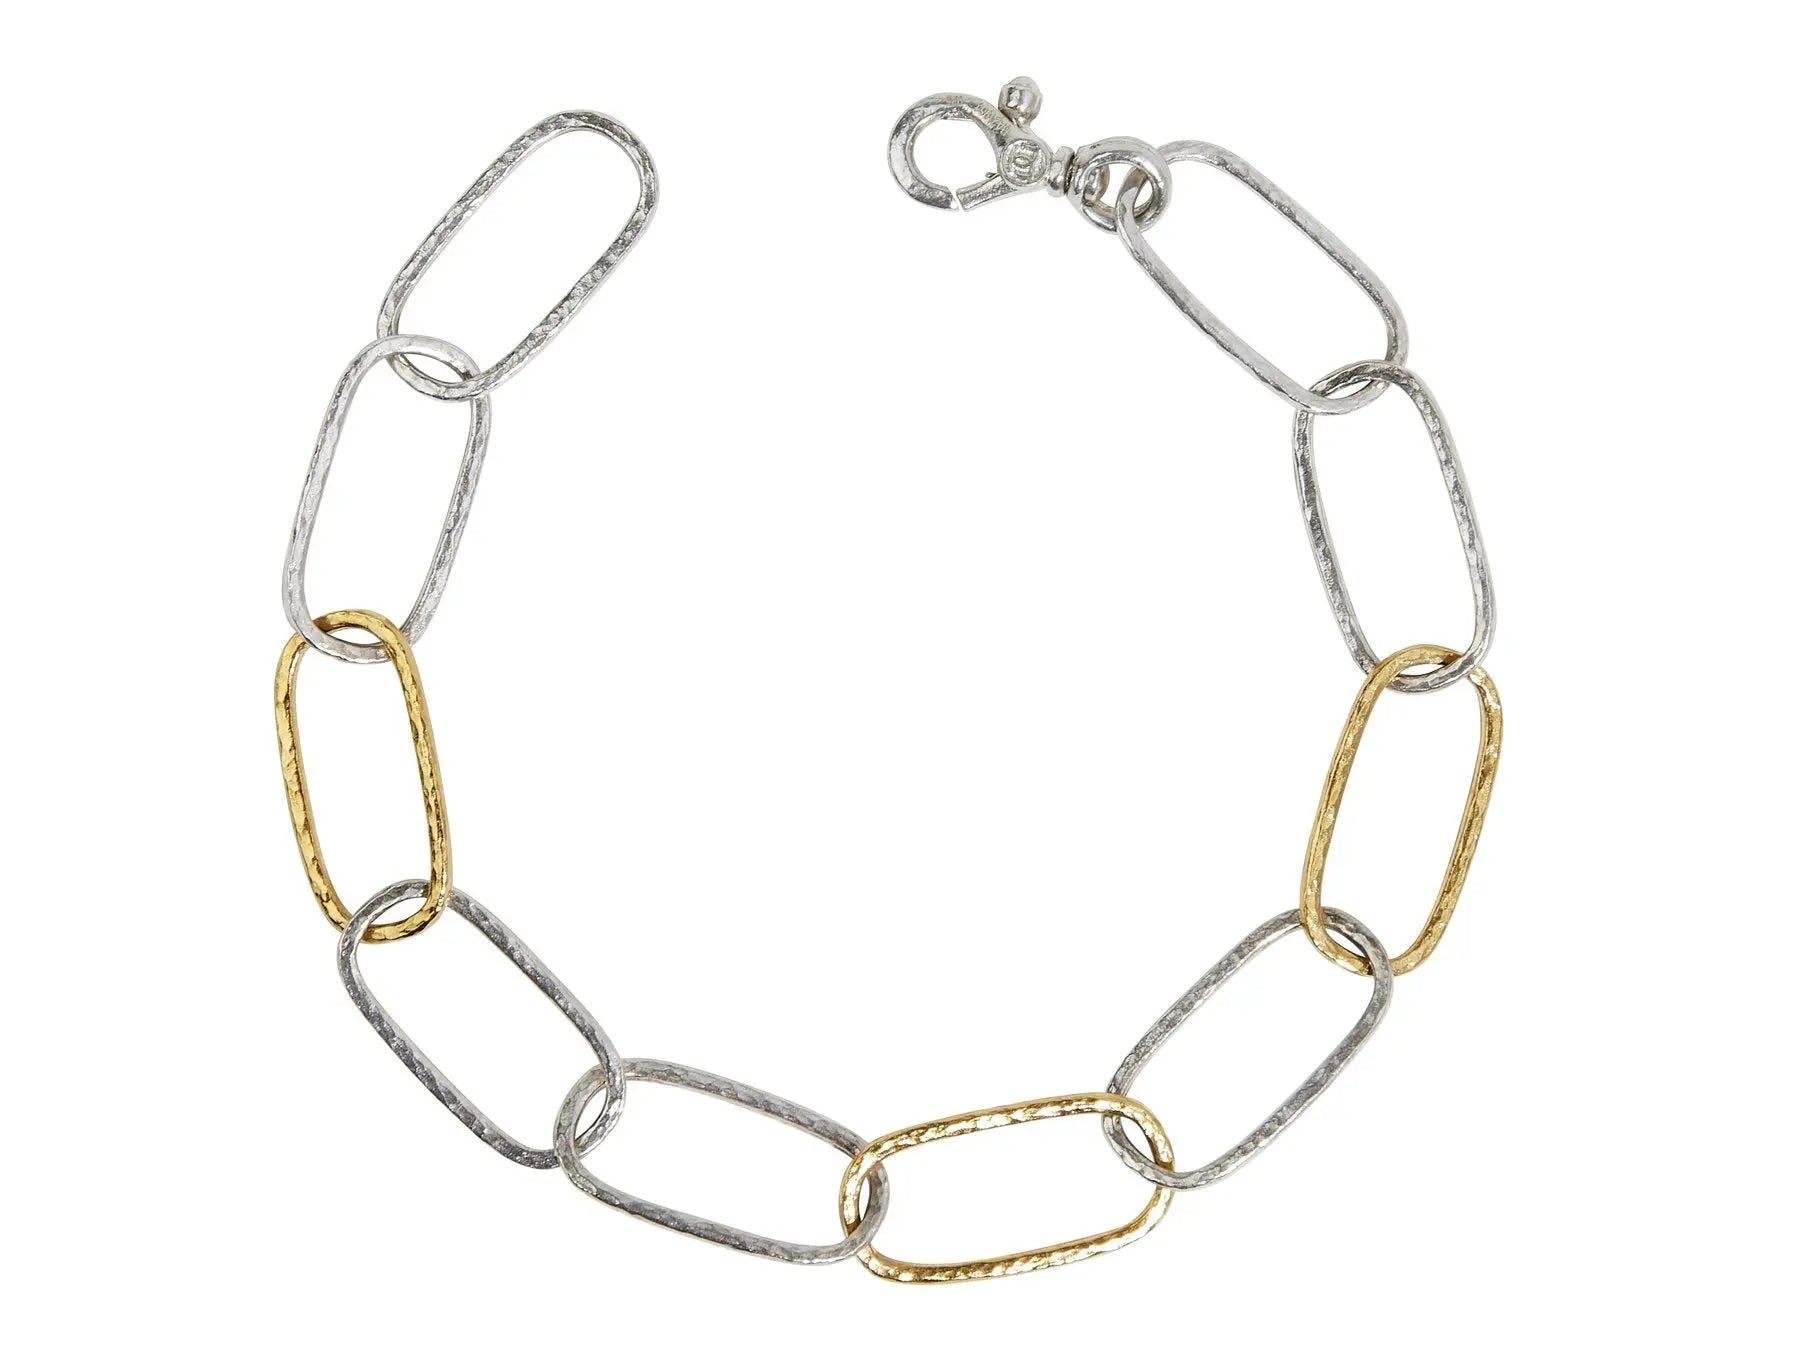 Sterling Silver Link Bracelet, Elongated, from the Geo Collection, plated with 24k Gold featuring oval links, with 3 gold links and handmade lobster clasp.  Length: 8 inches  Designed by Gurhan and made in Turkey